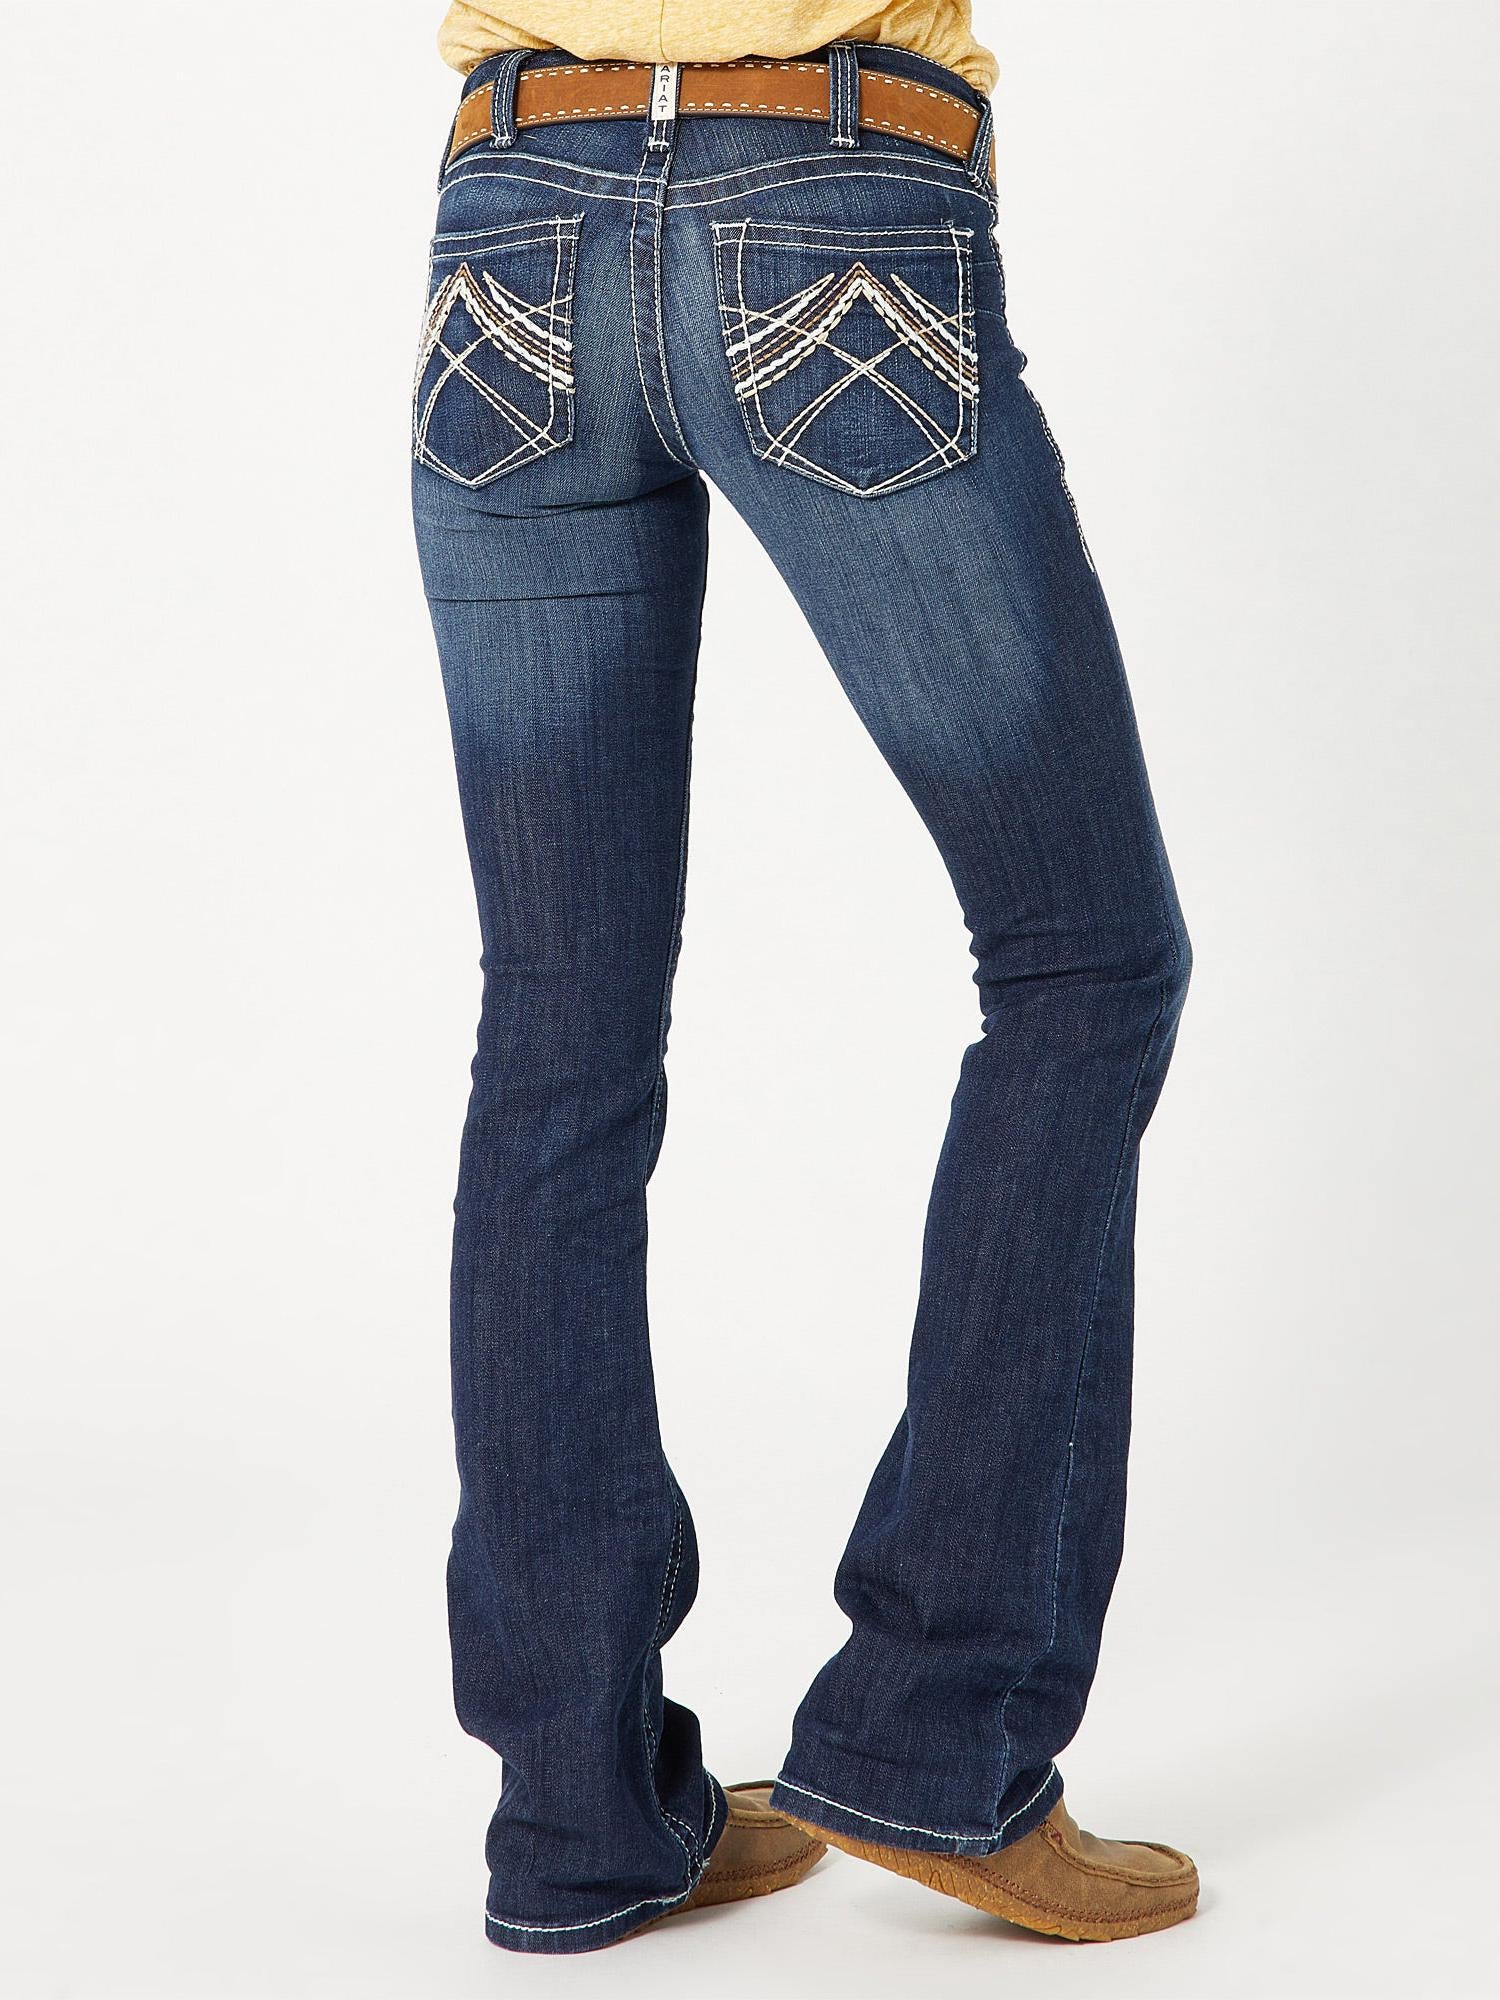 Ariat Women's R.E.A.L. Bootcut Rosey Whipstitch Jeans - Riding Warehouse